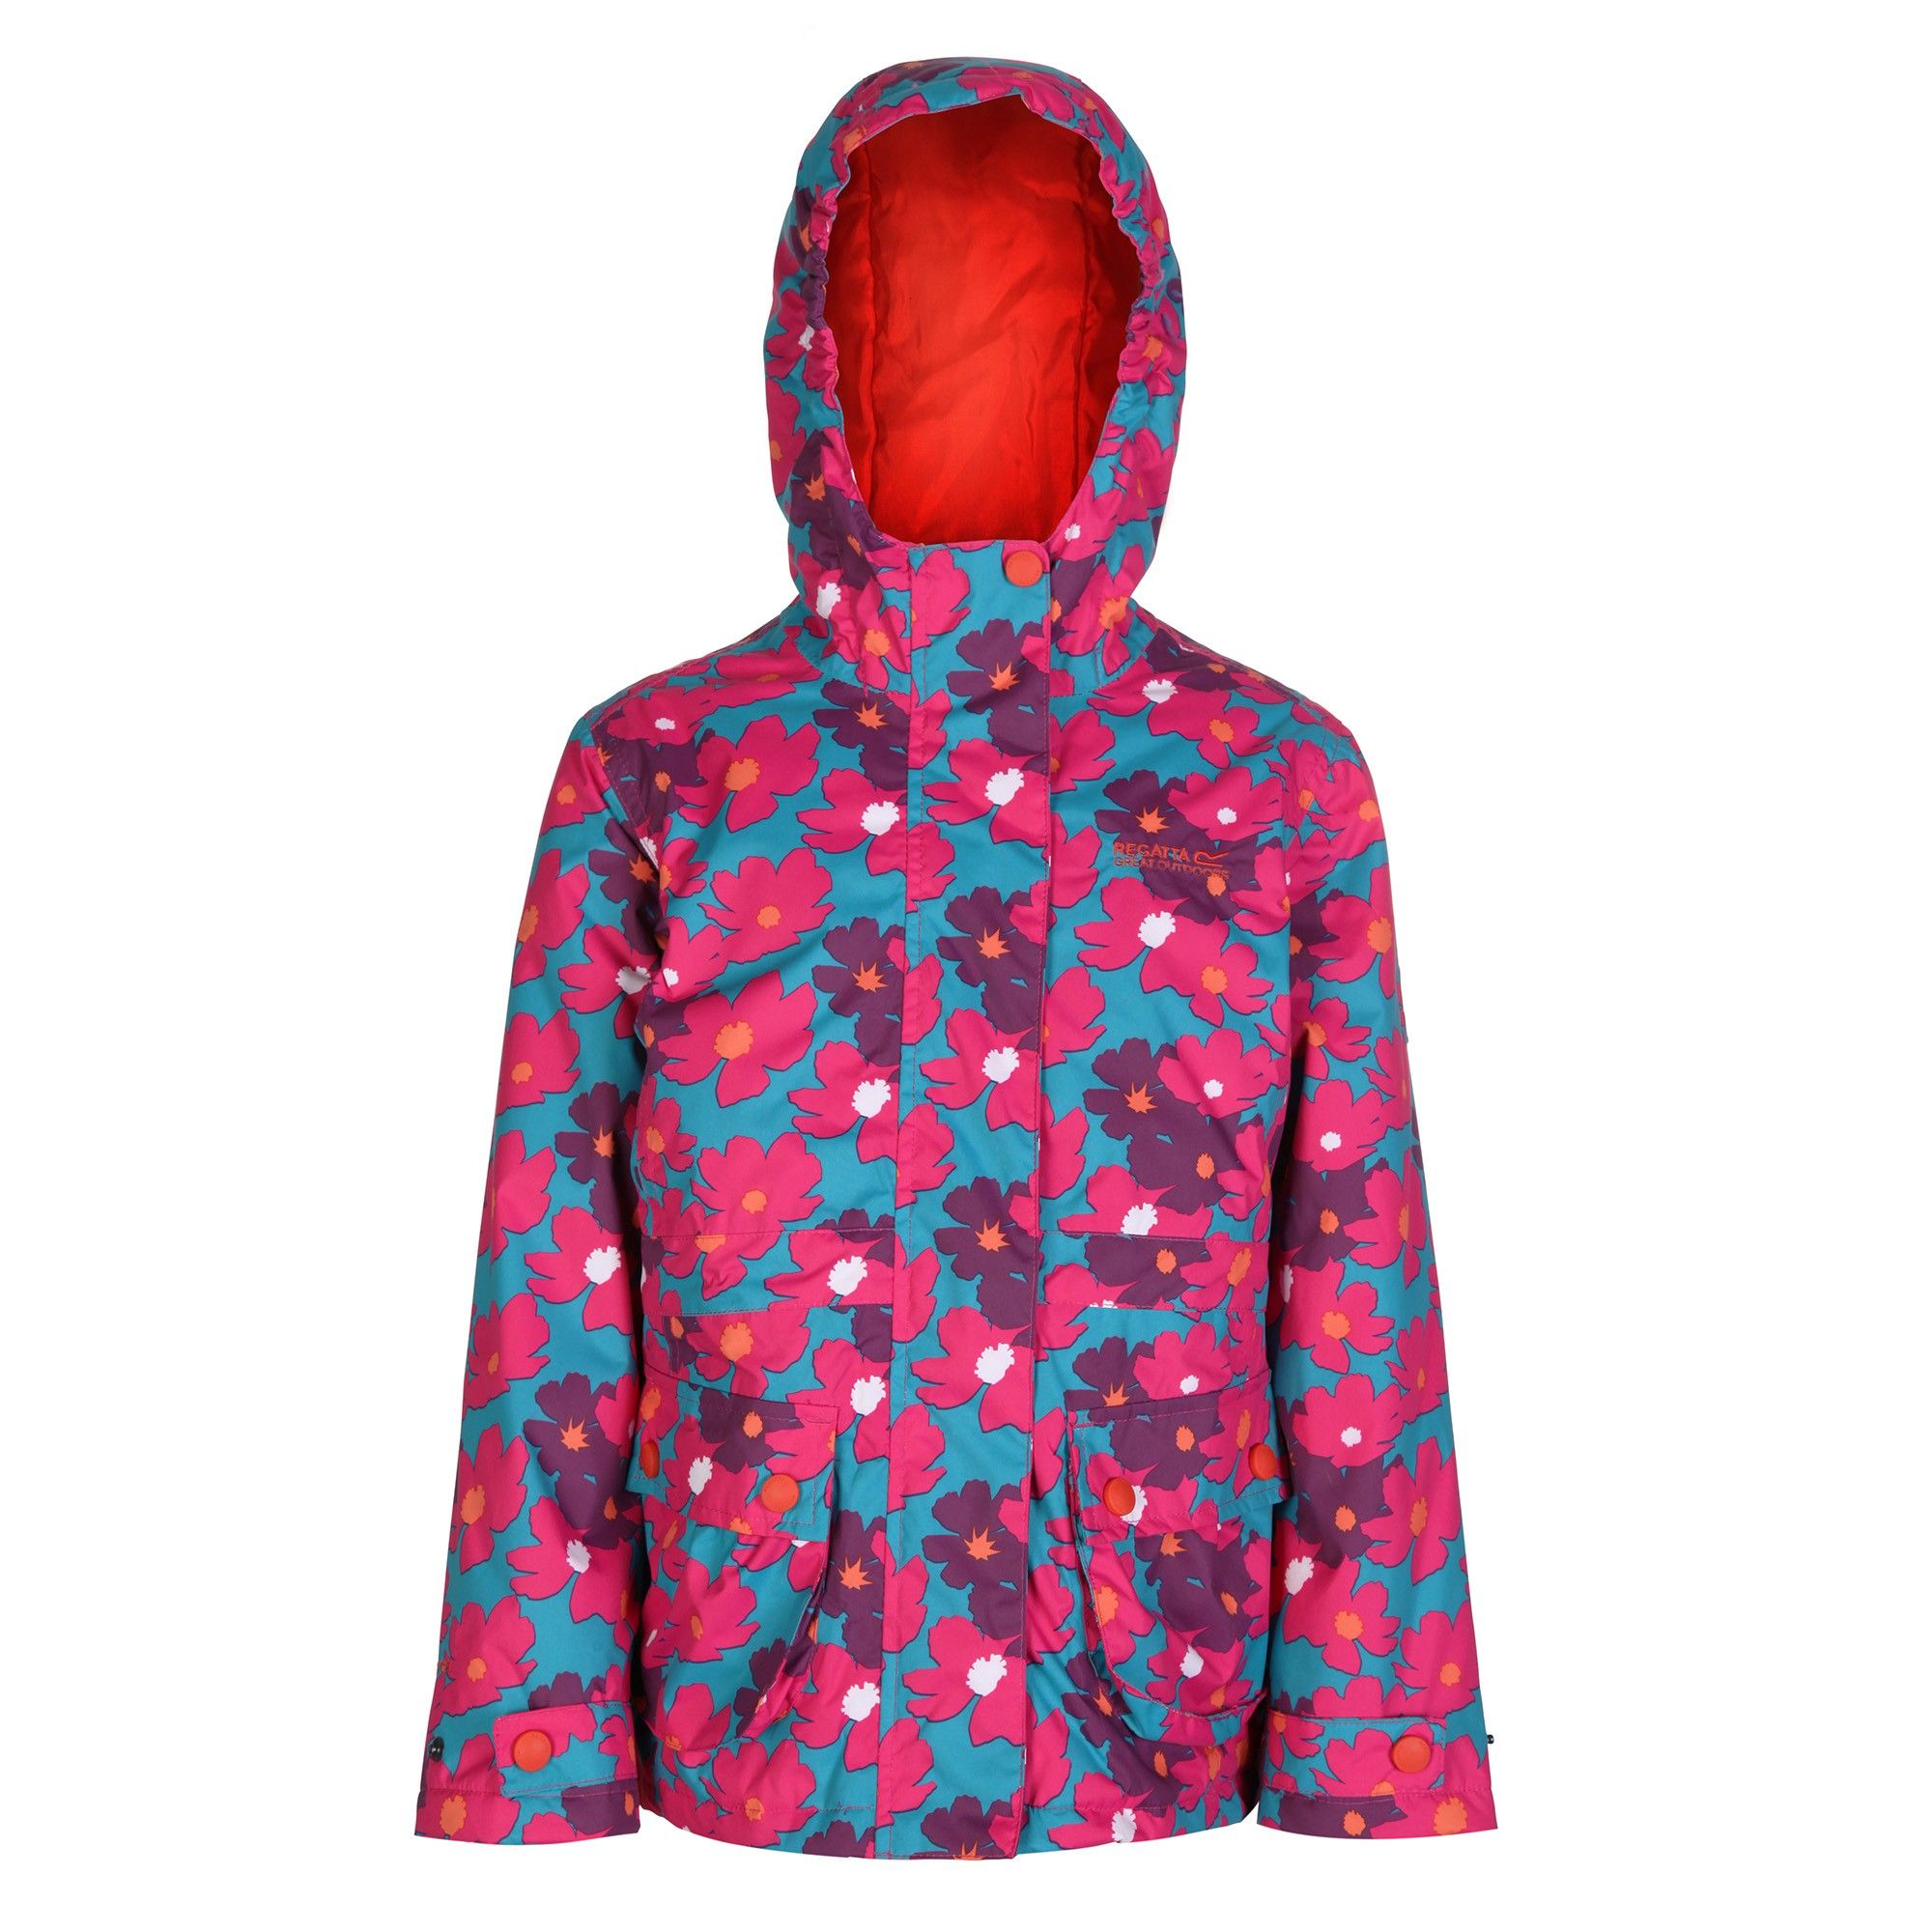 Waterproof and breathable Isotex printed polyester fabric. Taped seams. Thermo-Guard insulation. Polyester taffeta lining. Grown on hood. Reflective trim. 100% Polyester. Regatta Kids Sizing (chest approx): 2 Years (53-55cm), 3-4 Years (55-57cm), 5-6 Years (59-61cm), 7-8 Years (63-67cm), 9-10 Years (69-73cm), 11-12 Years (75-79cm), 32 (79-83cm), 34 (83-85cm).